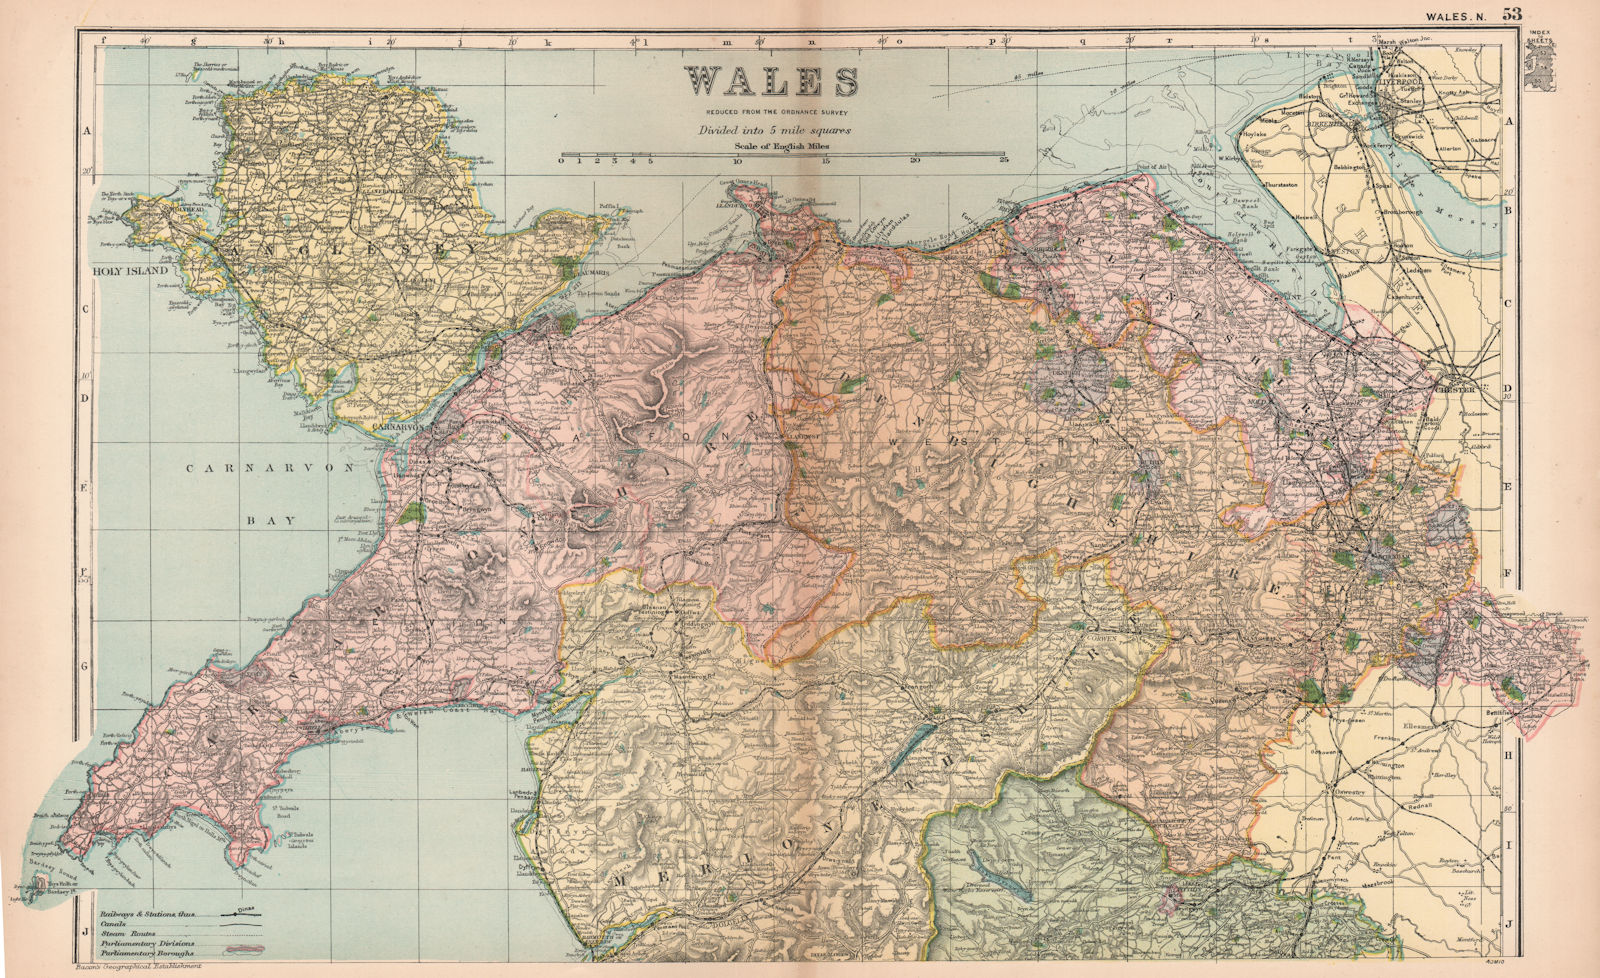 NORTH WALES. Showing Parliamentary divisions & boroughs. BACON 1901 old map